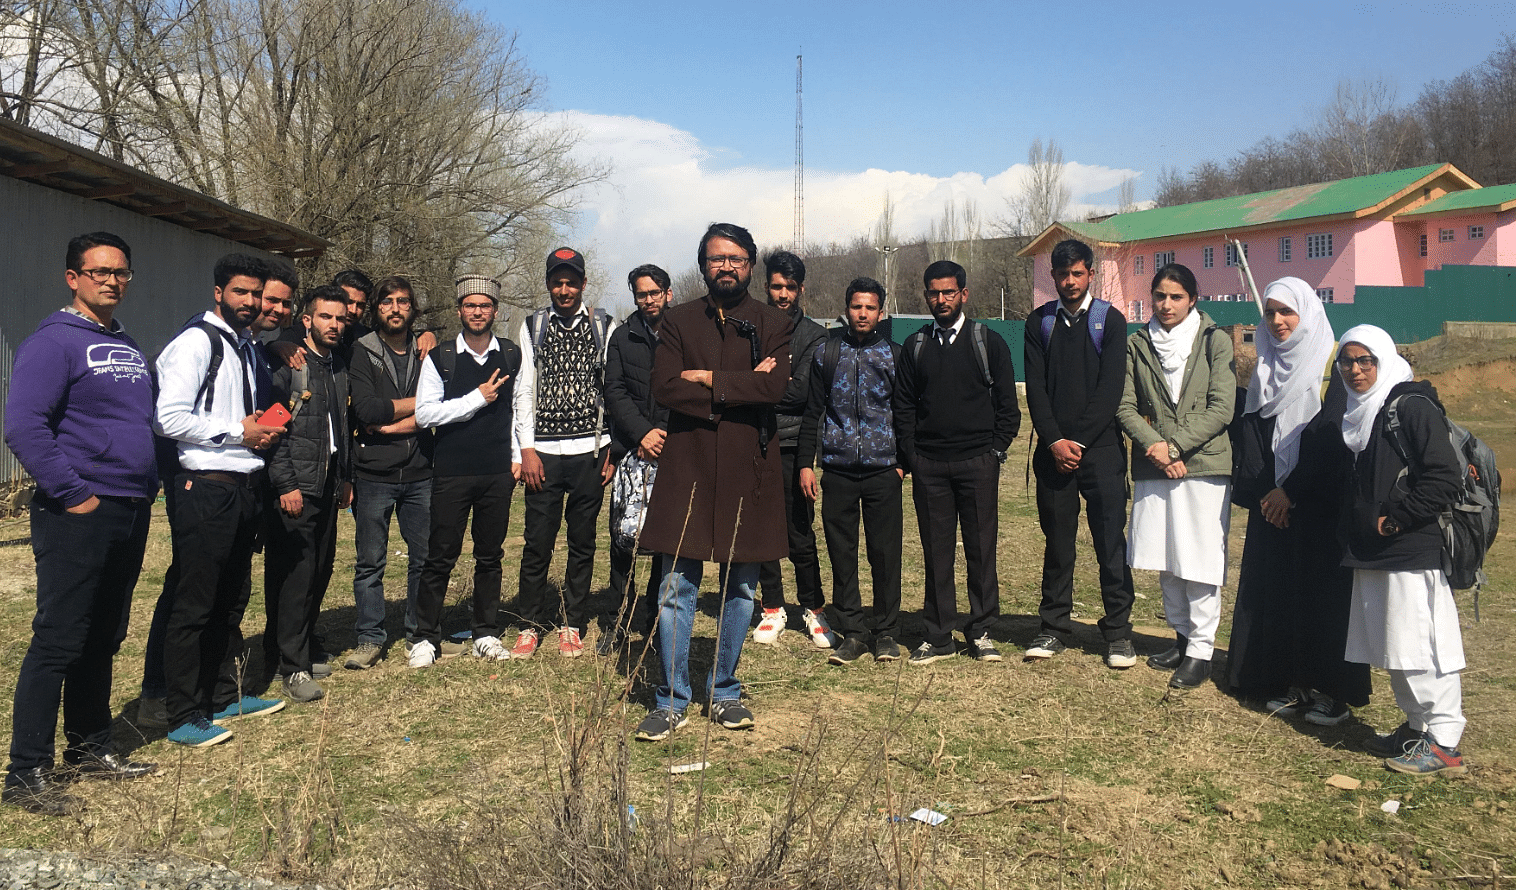 After all what it is that worries and upsets the youth of Baramulla? When we asked this question, the students said it’s the political system that disillusions them.